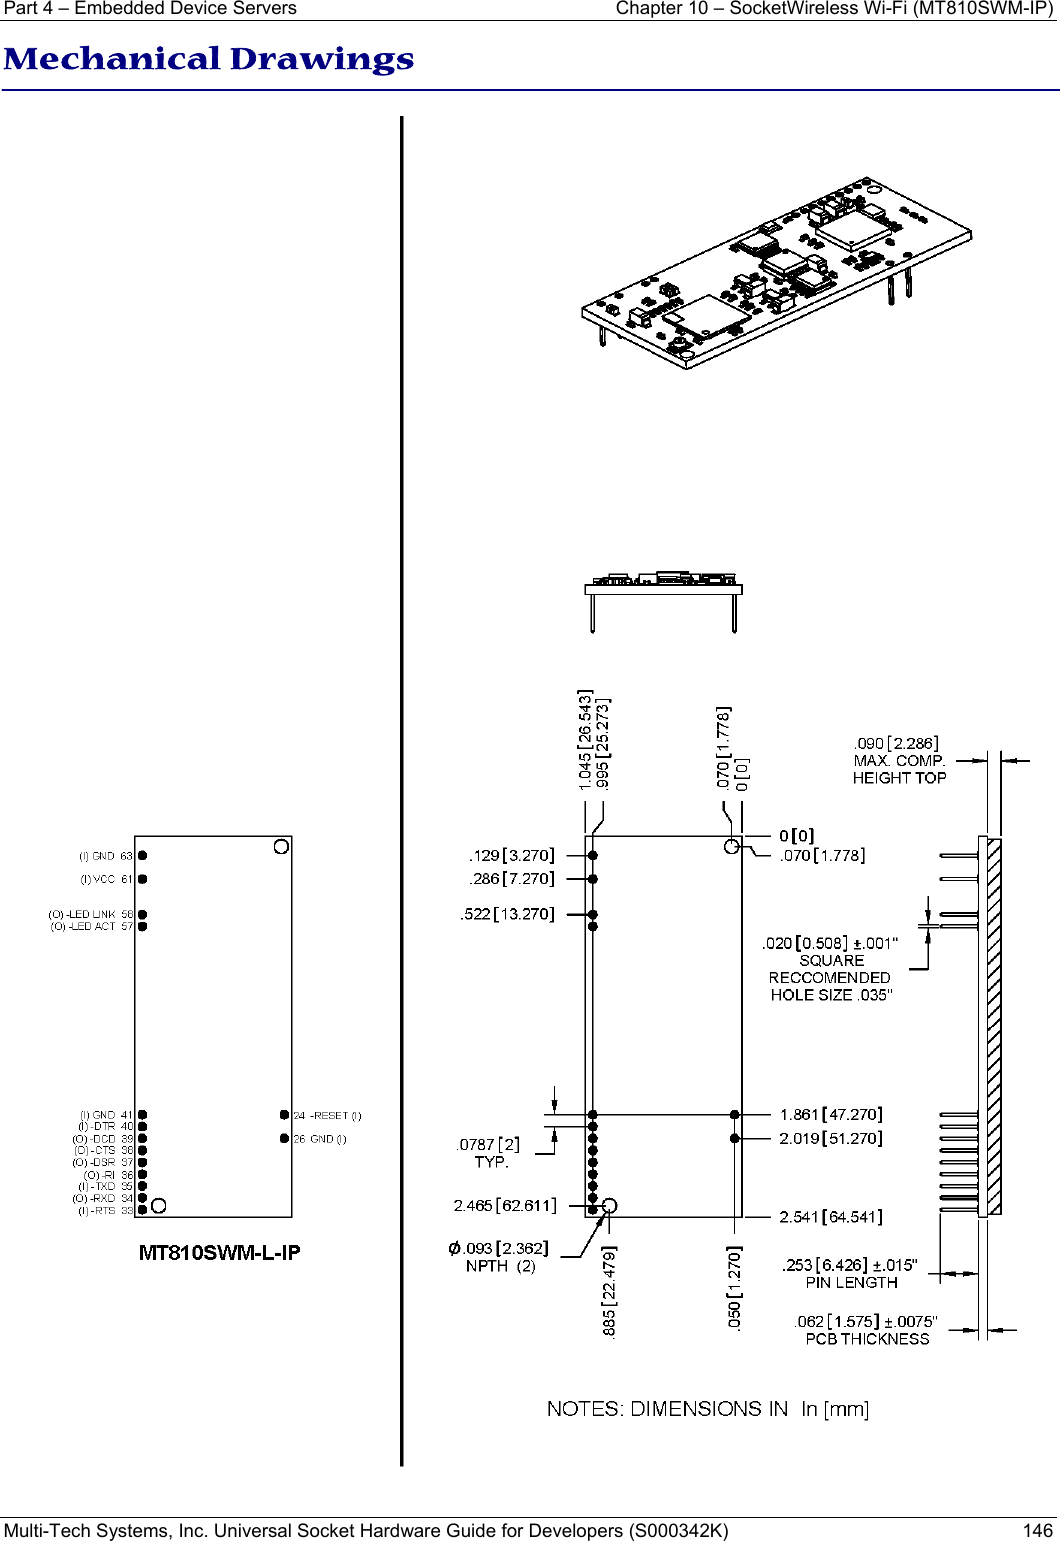 Part 4 – Embedded Device Servers  Chapter 10 – SocketWireless Wi-Fi (MT810SWM-IP) Multi-Tech Systems, Inc. Universal Socket Hardware Guide for Developers (S000342K)  146  Mechanical Drawings  